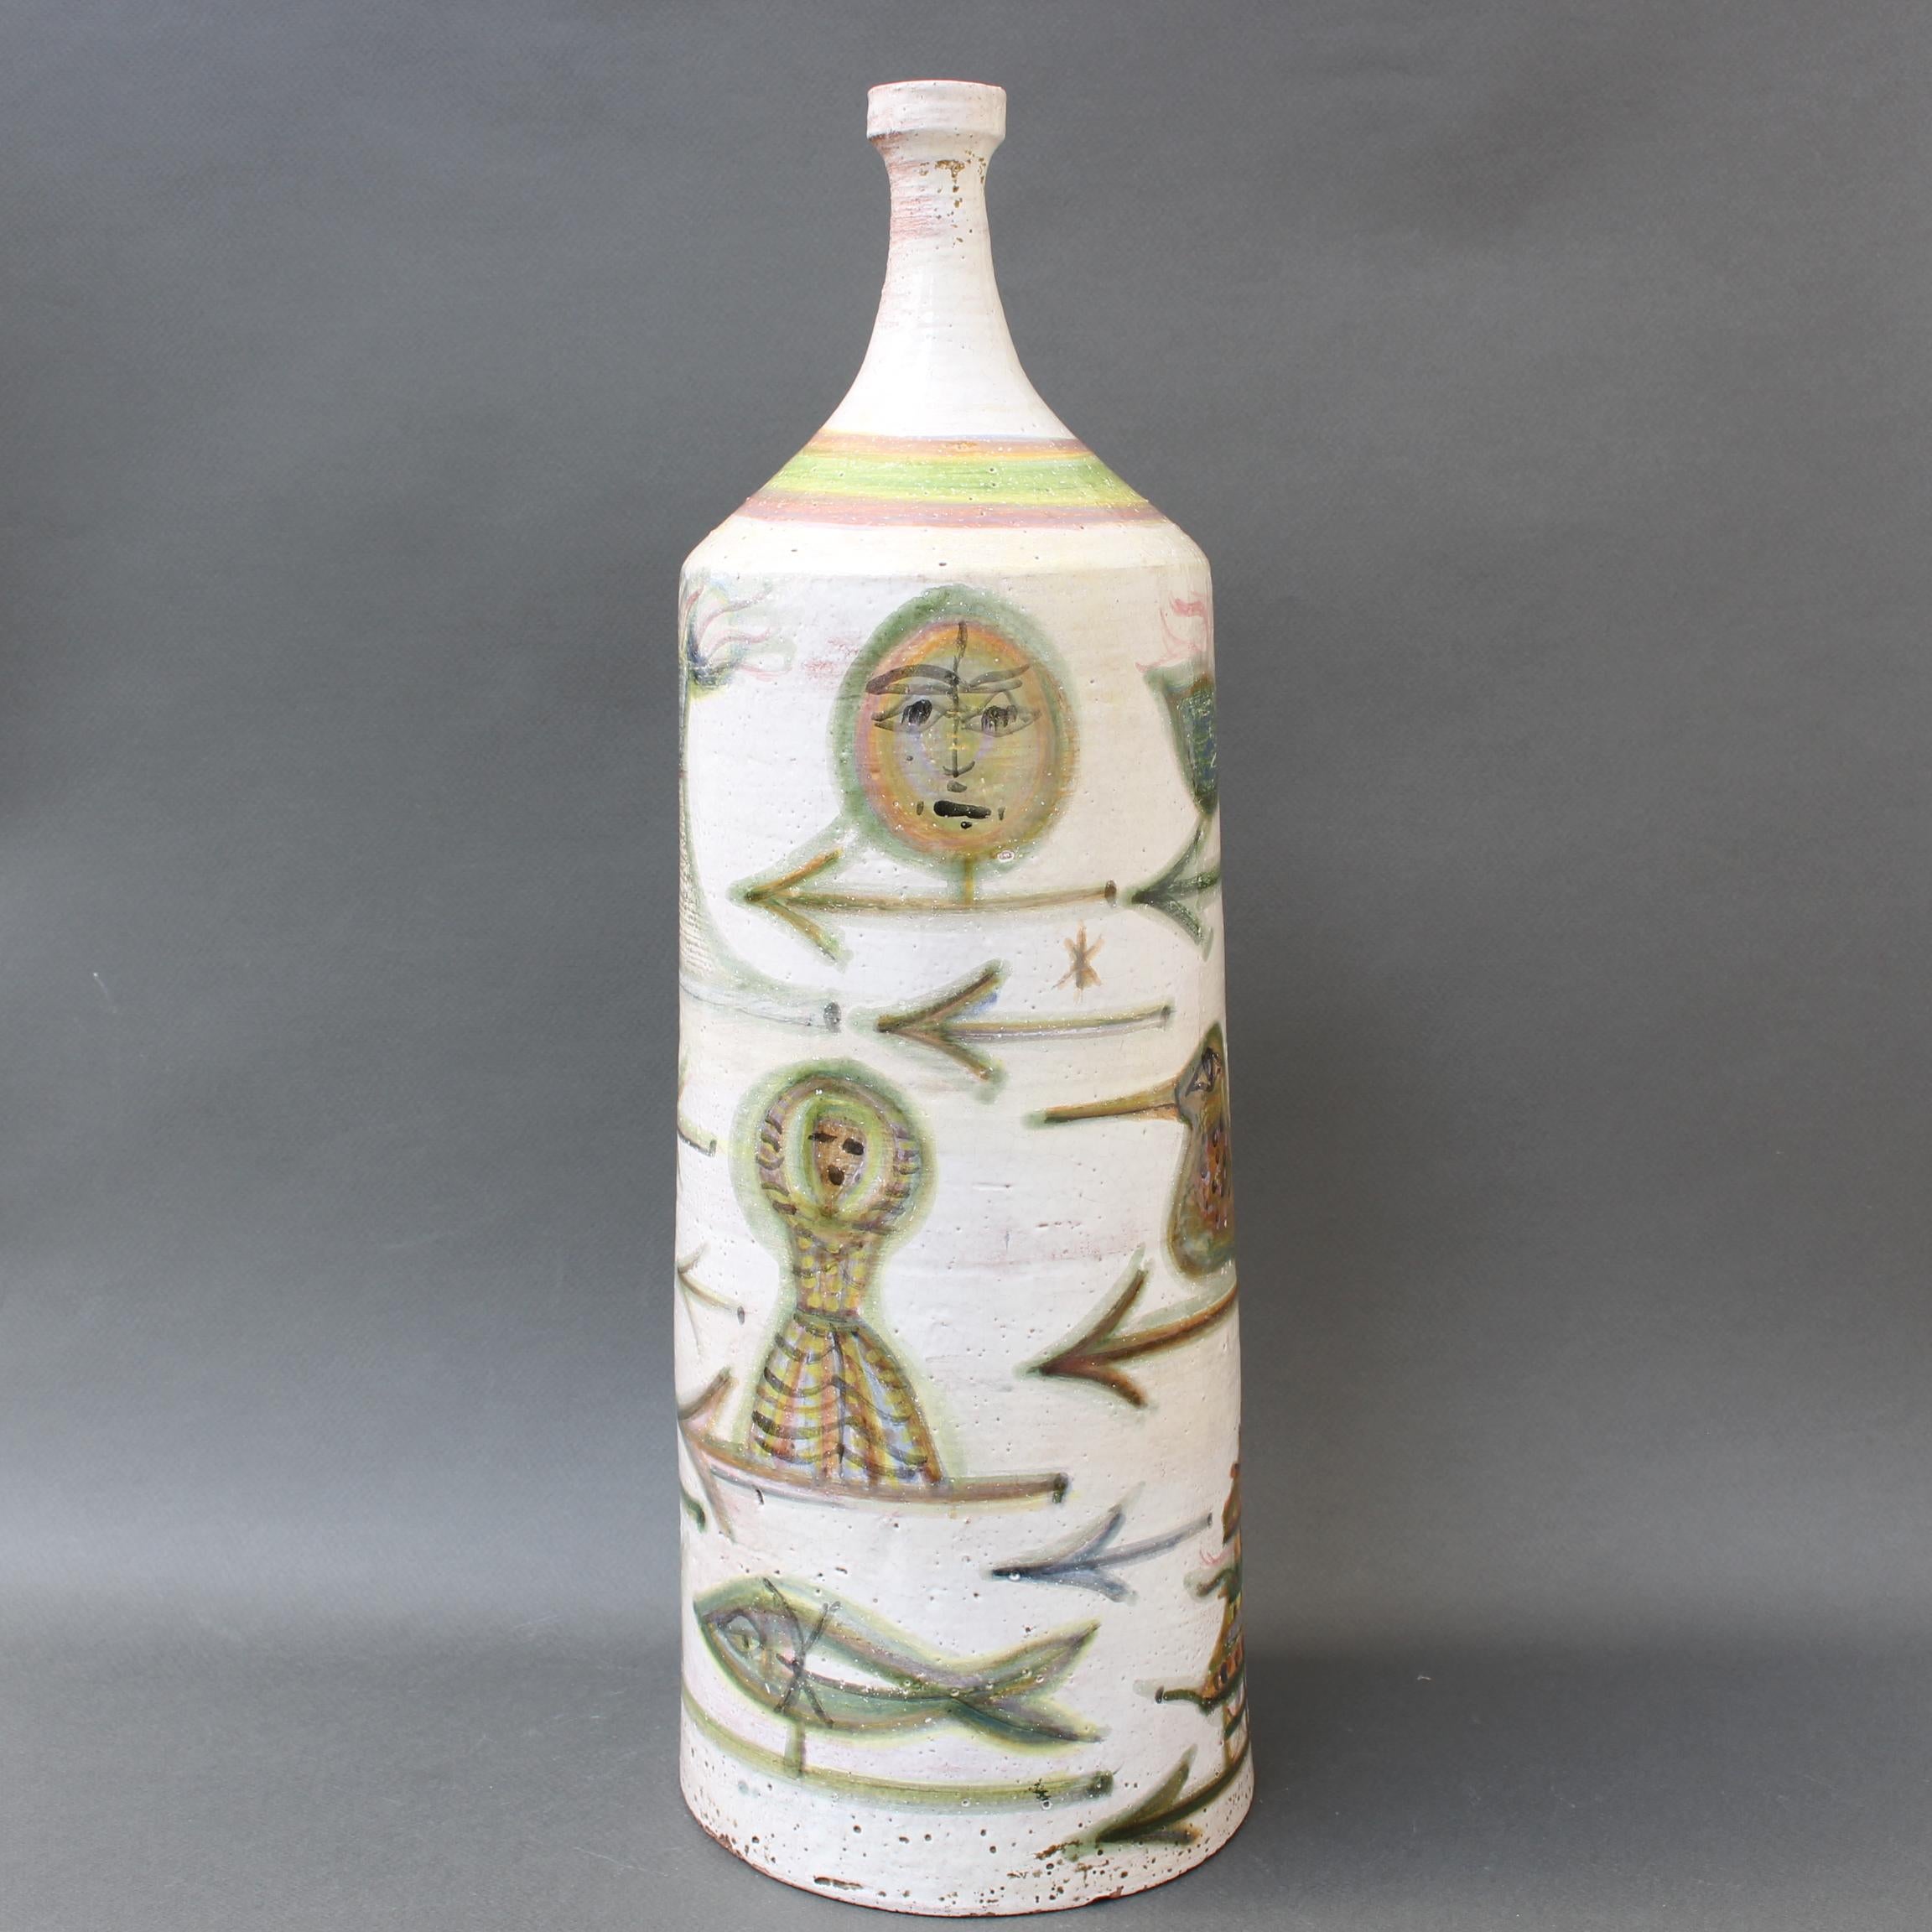 Decorative ceramic bottle-shaped vase by David Sol, Sant Vicens pottery (circa 1950s). Truly a unique piece, the figures in the fanciful motif - humans, animals, plants, building structures and fish in the ocean dwell on the form accentuated by